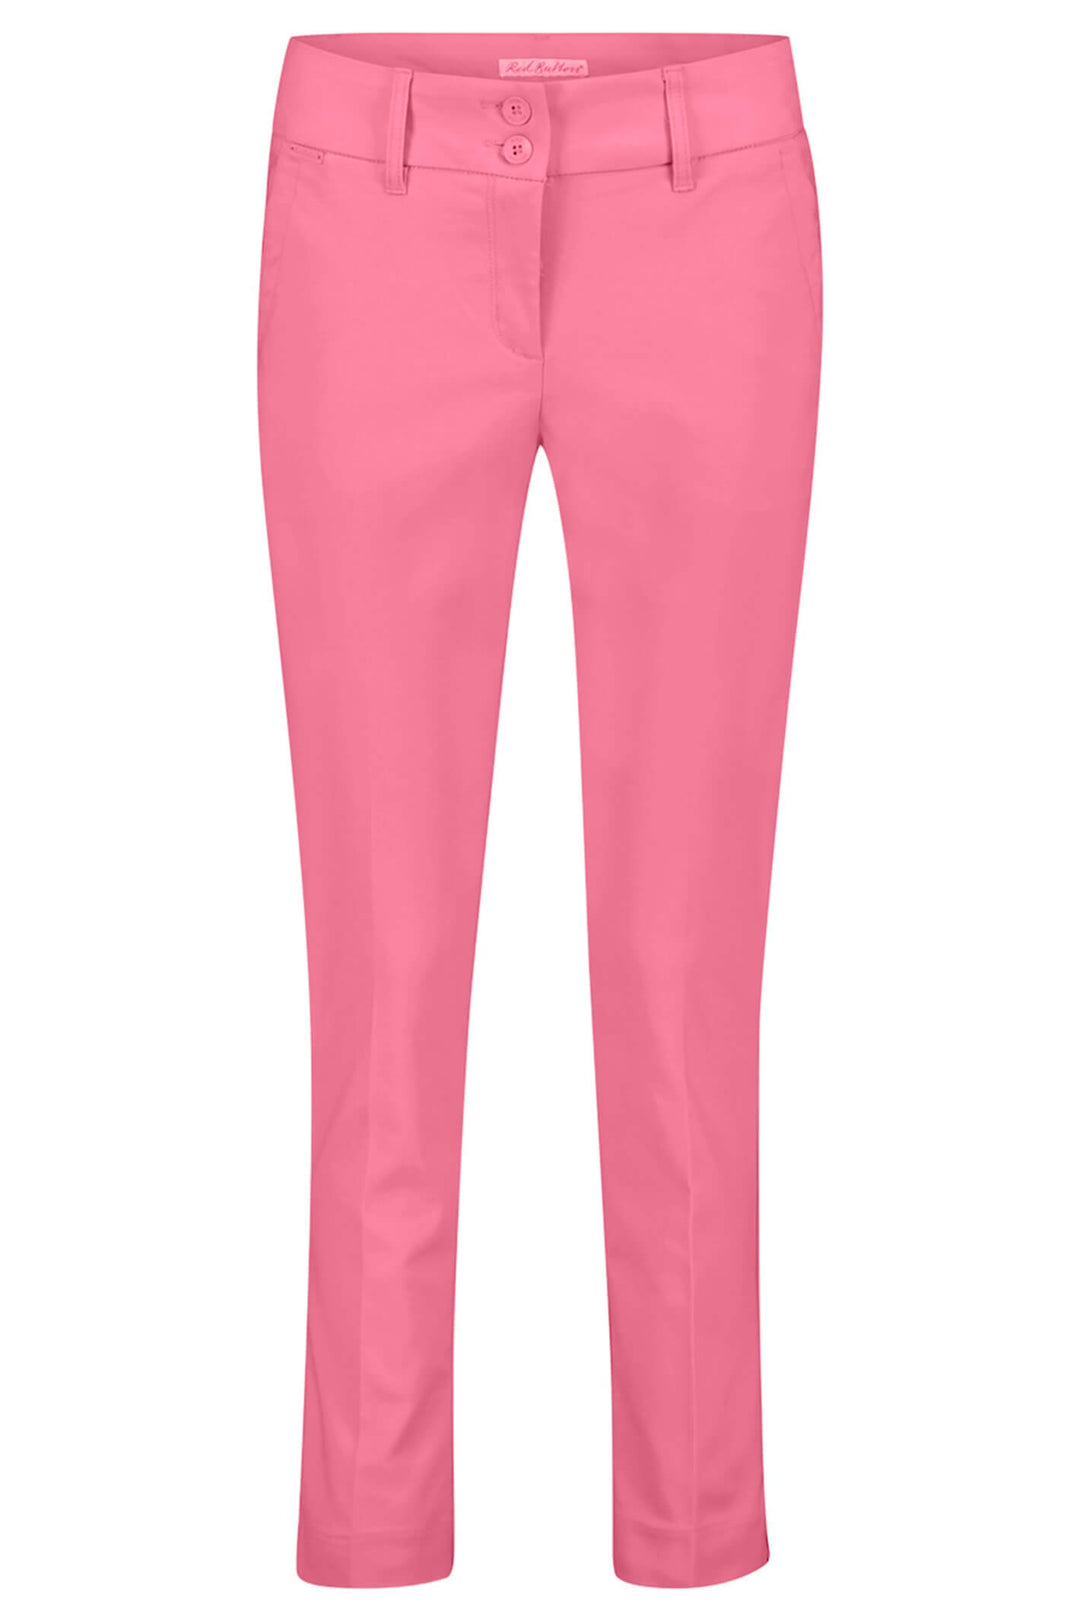 Red Button SRB3944 Diana Pink Smart Colour Trousers - Olivia Grace Fashion